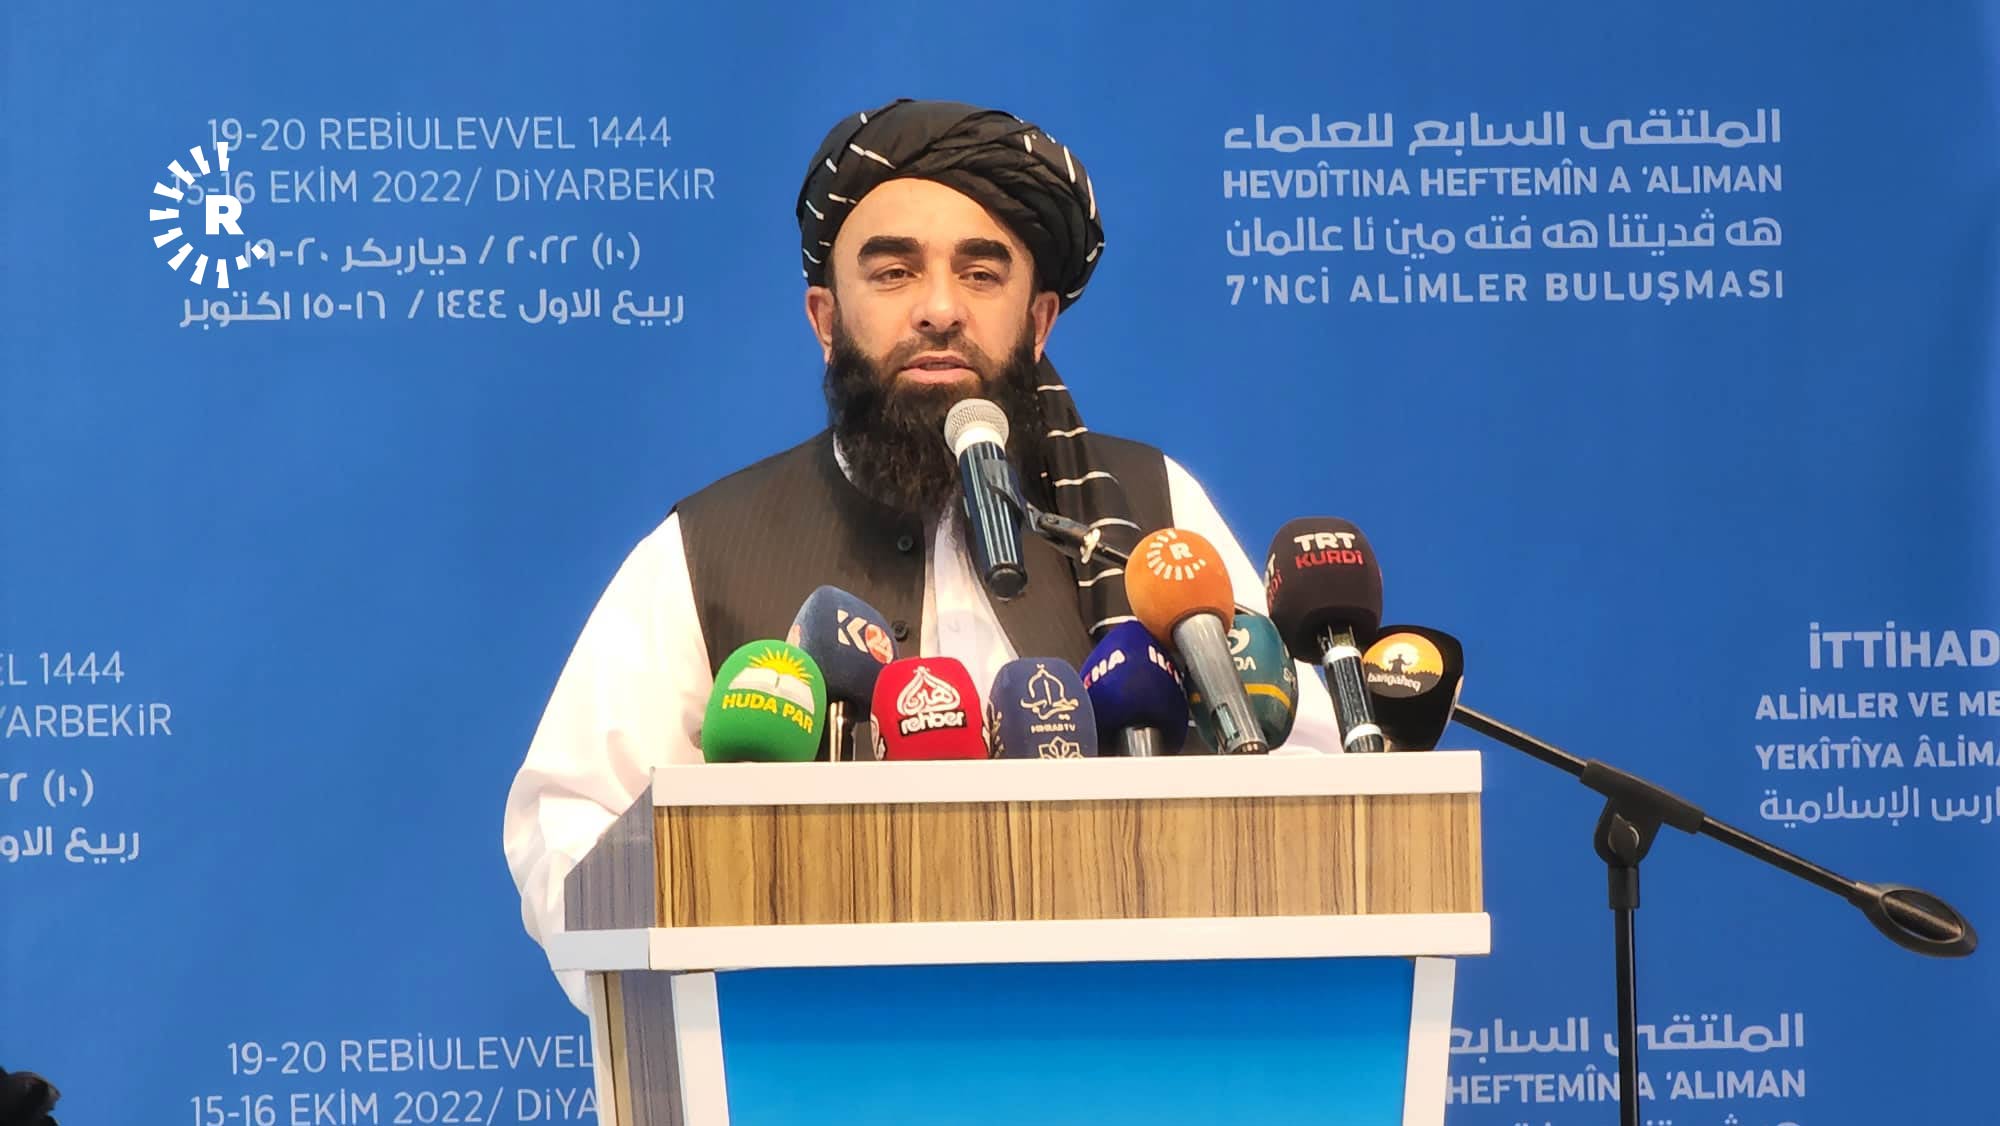 Turkish government is a close friend, says Taliban leader at a controversial pro-Hizbullah meeting